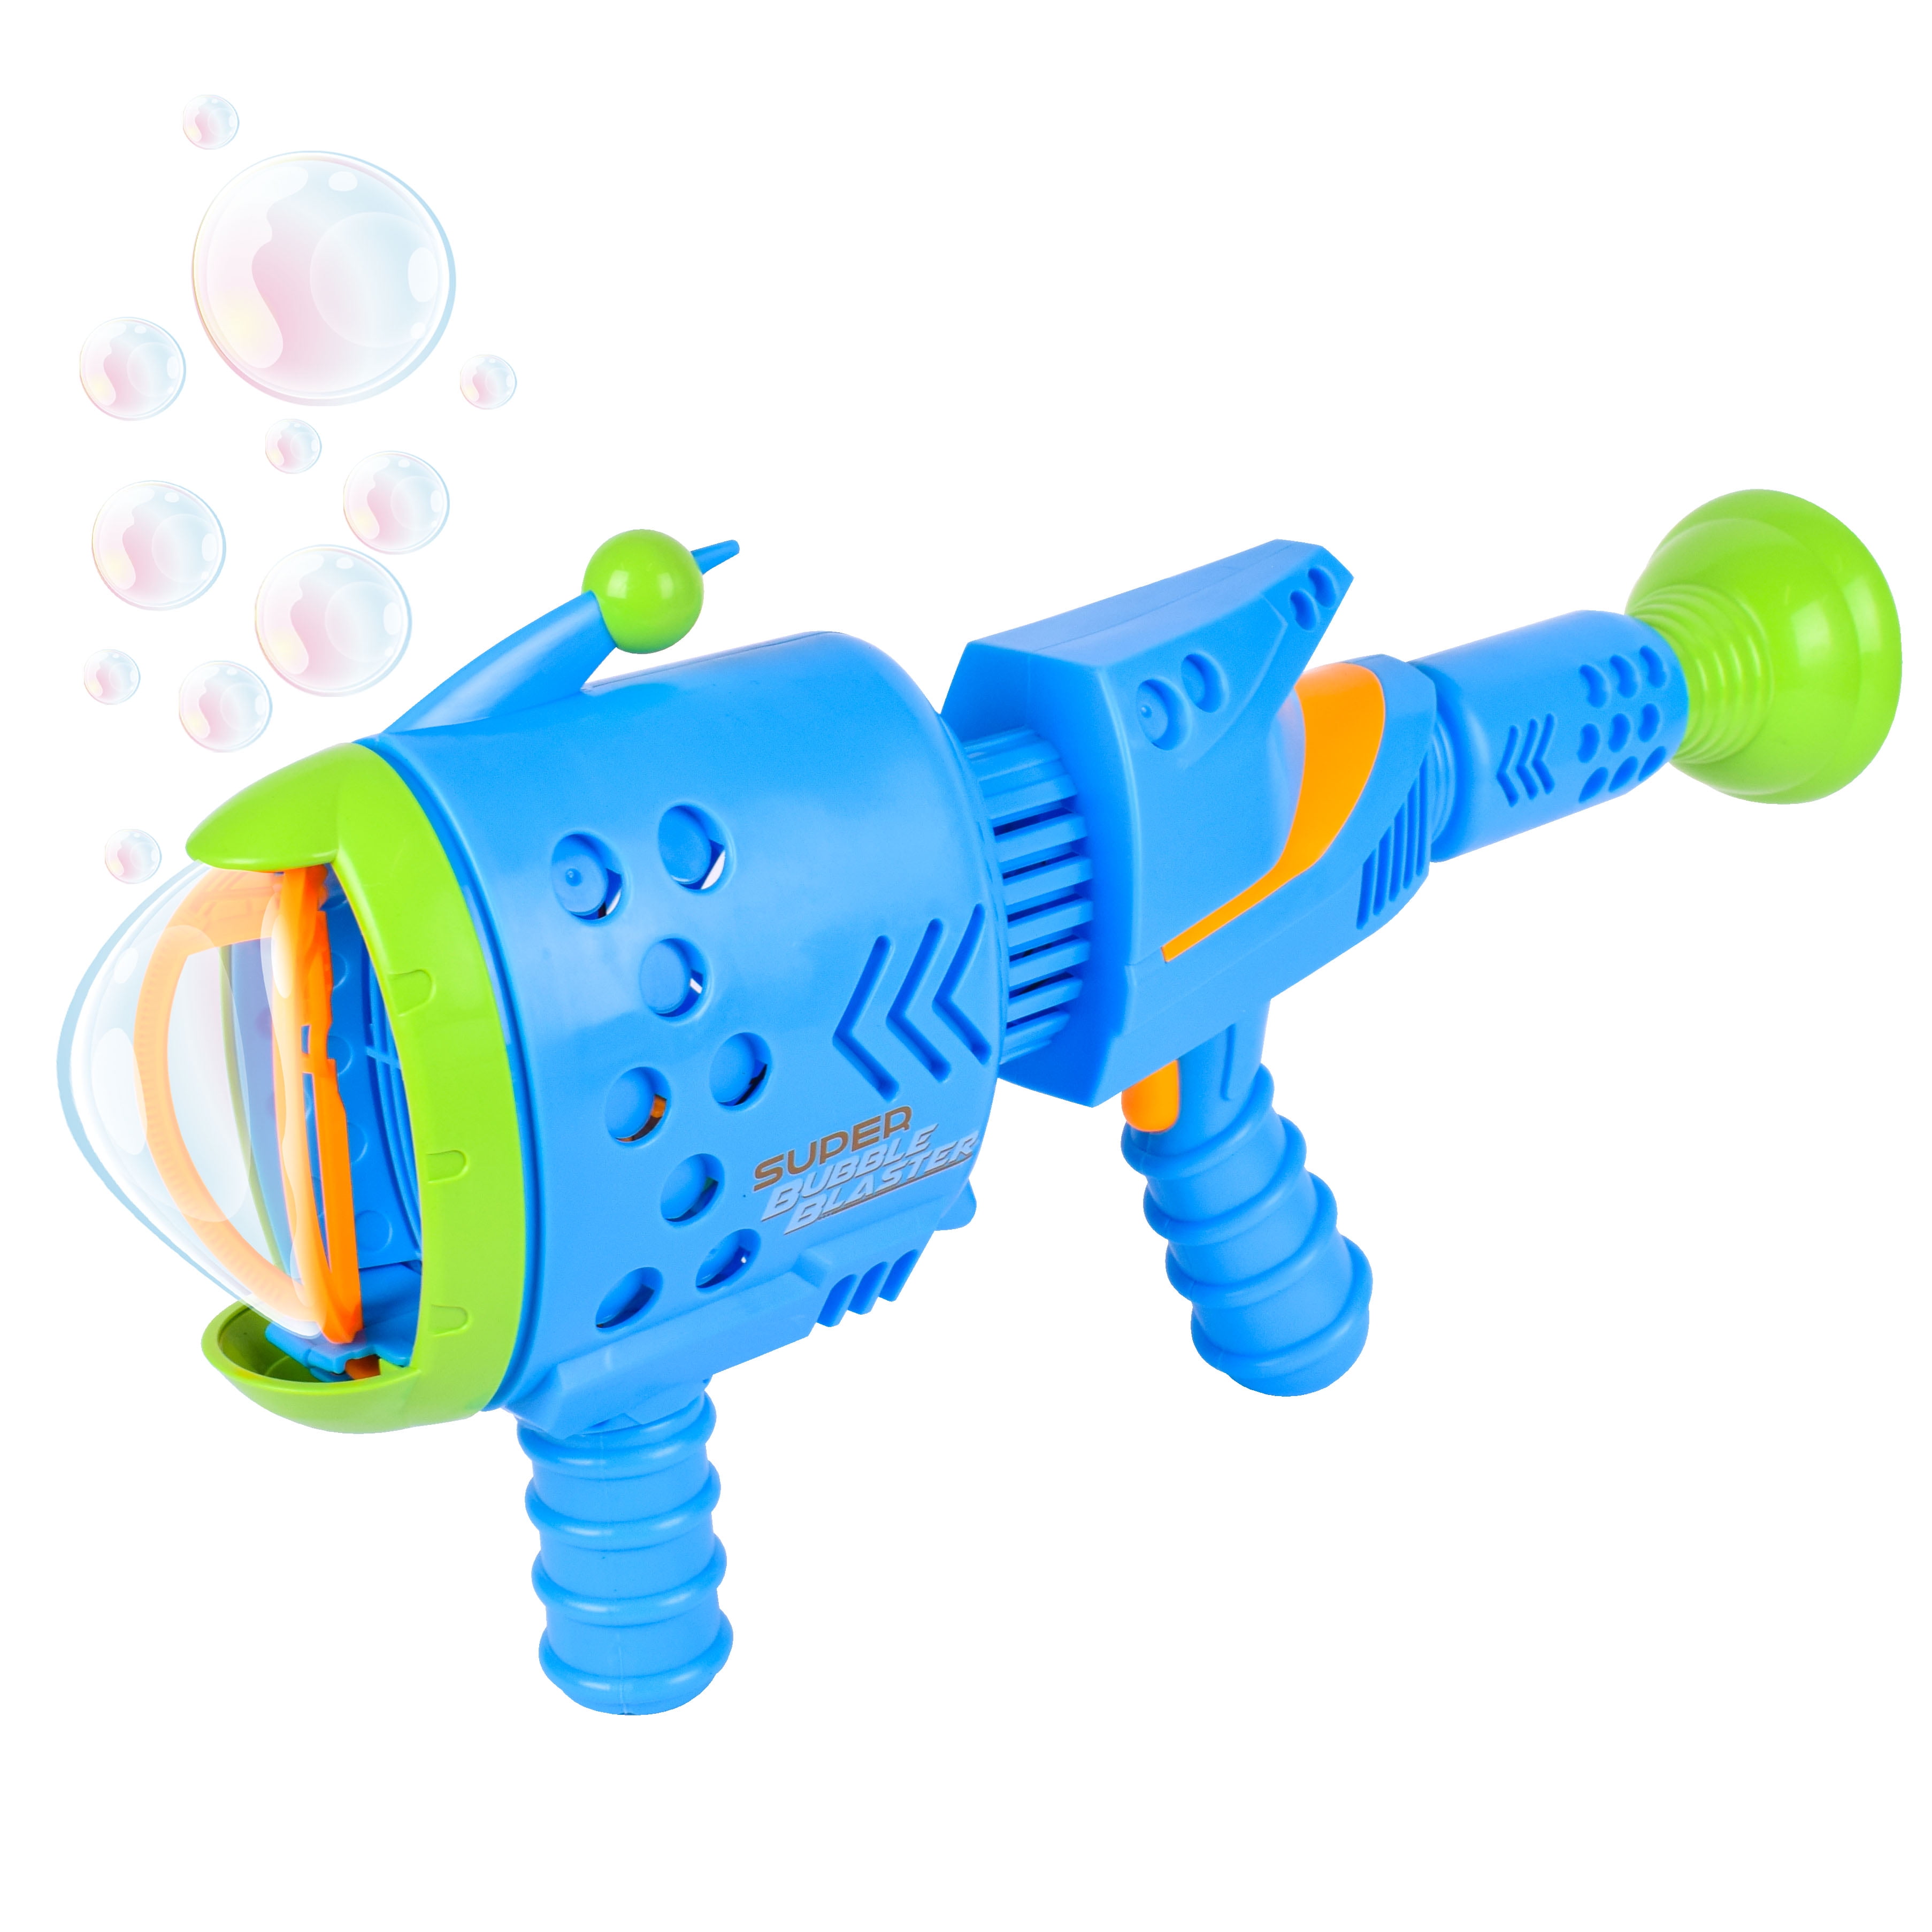 Play Day Light Up Bubble Blowing Bazooka  Includes Bubble Solution $3.85